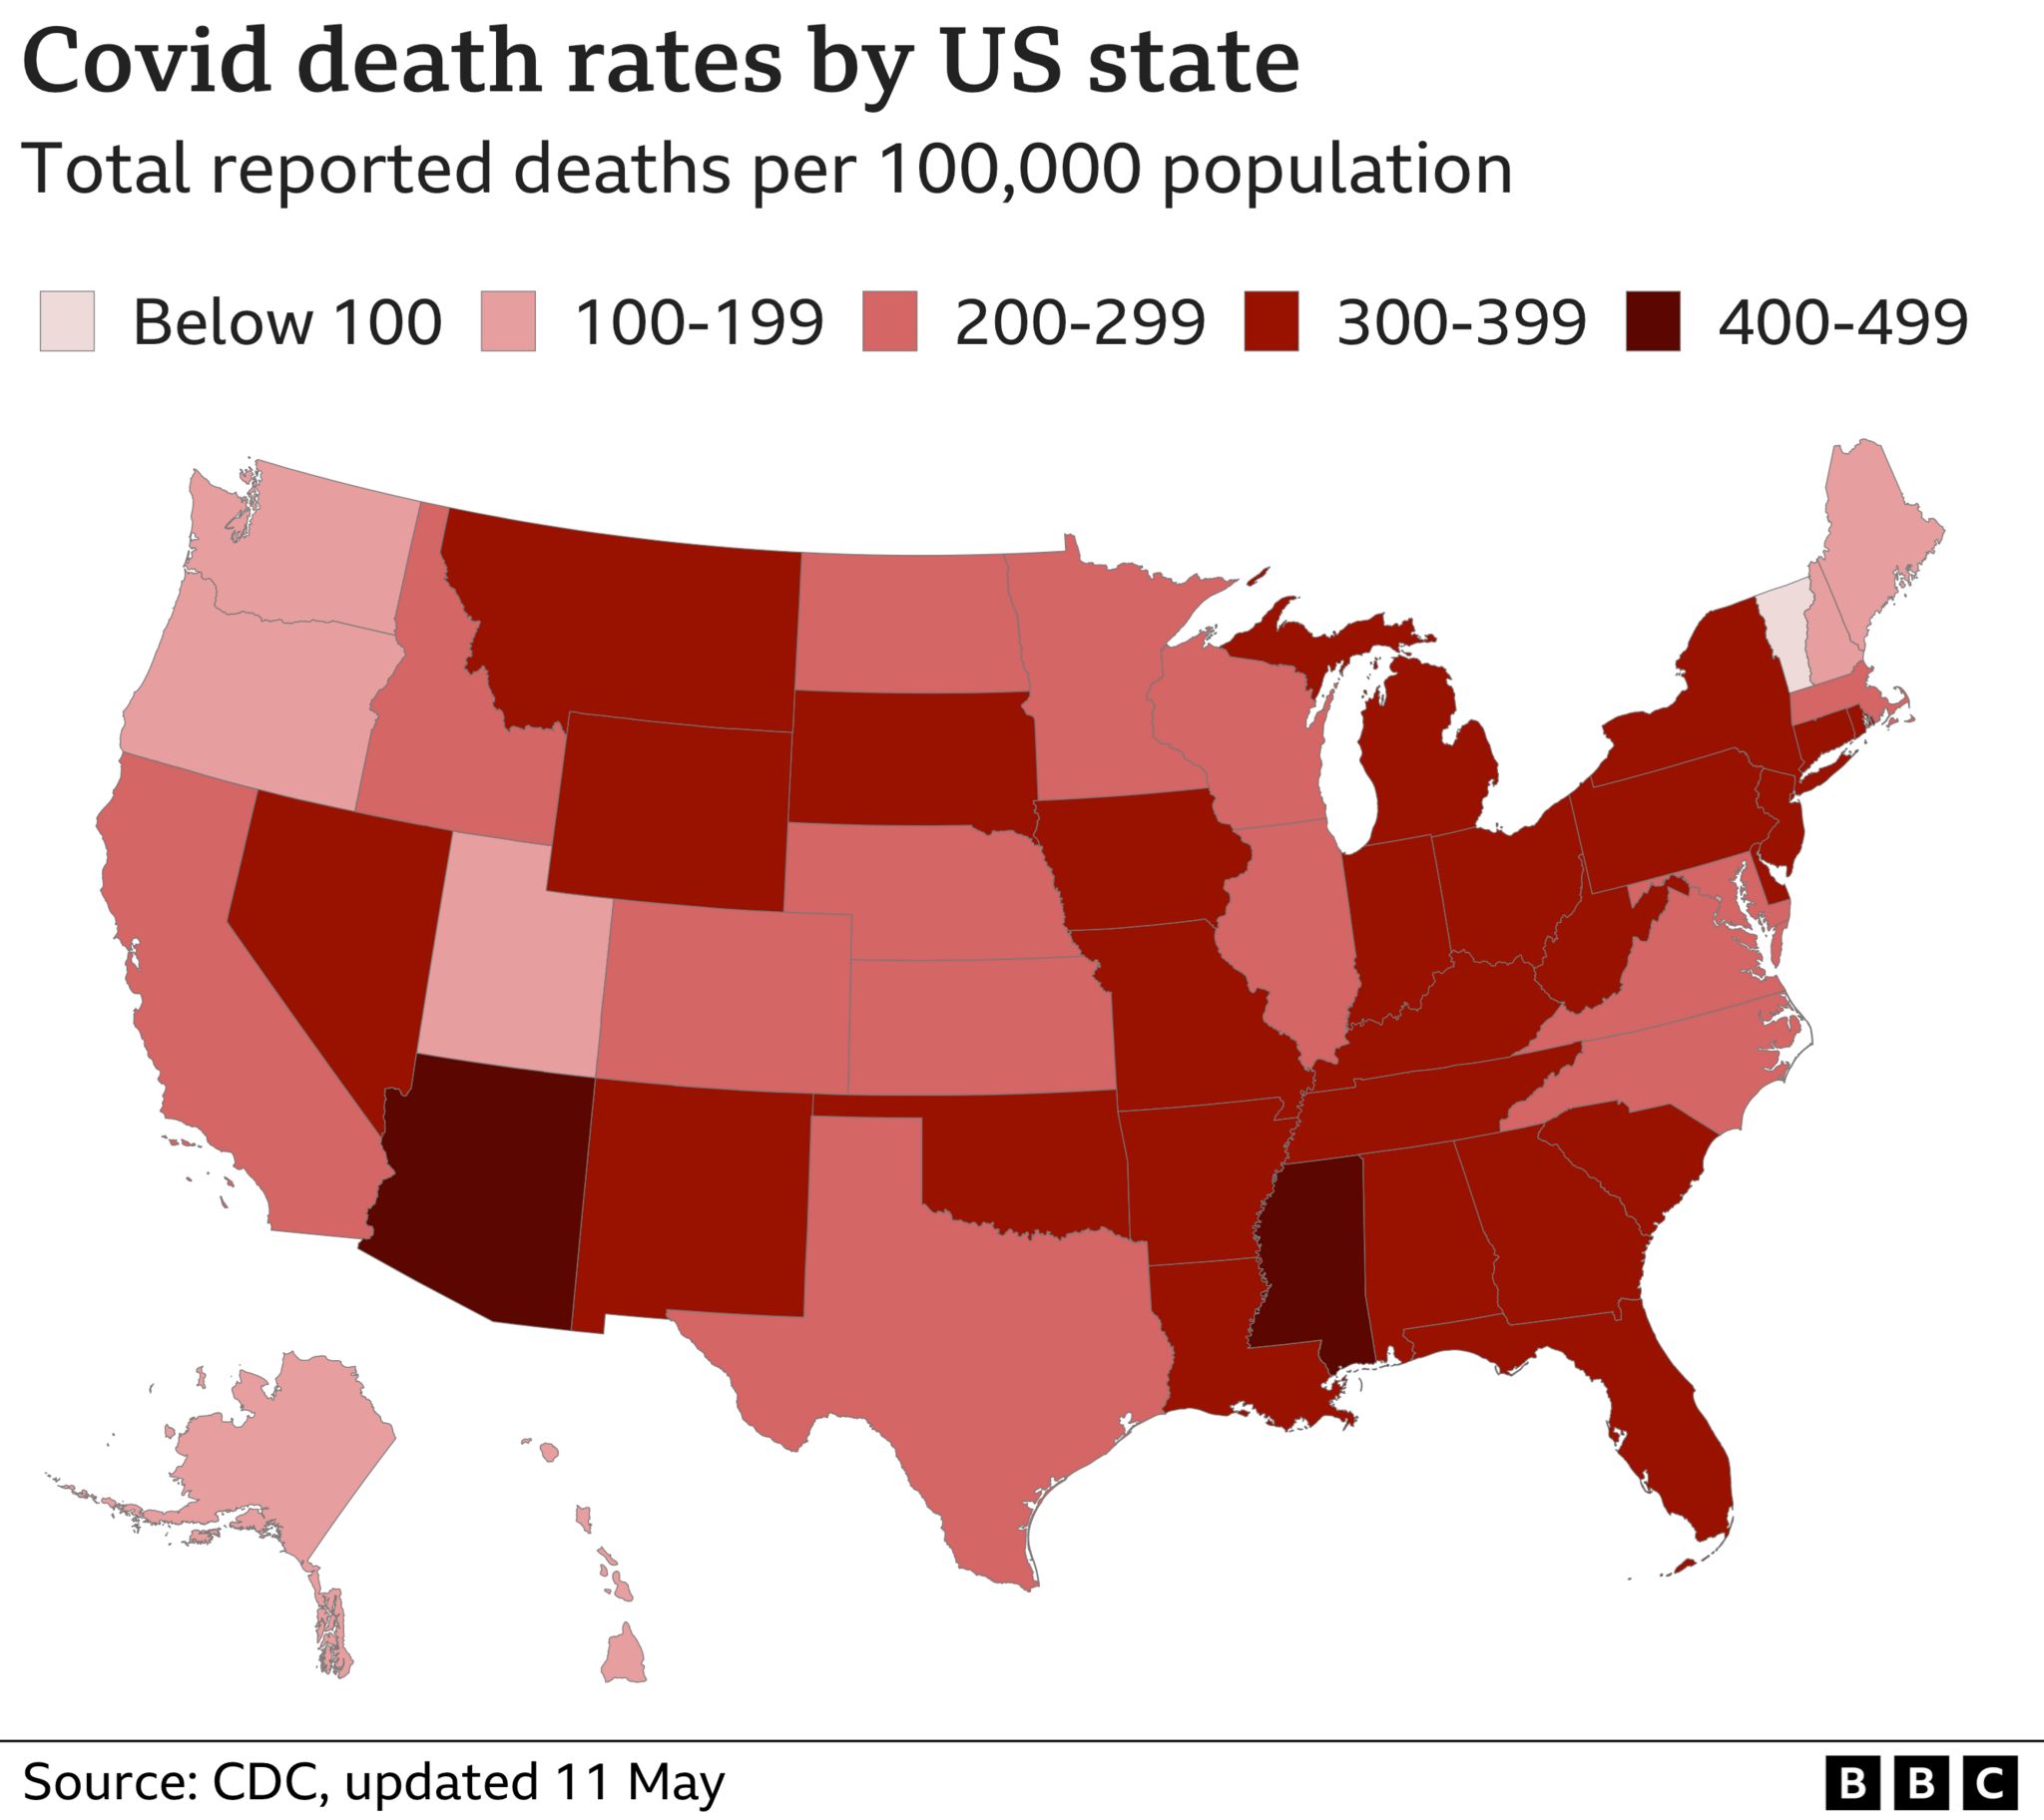 Death rates by state 12 May